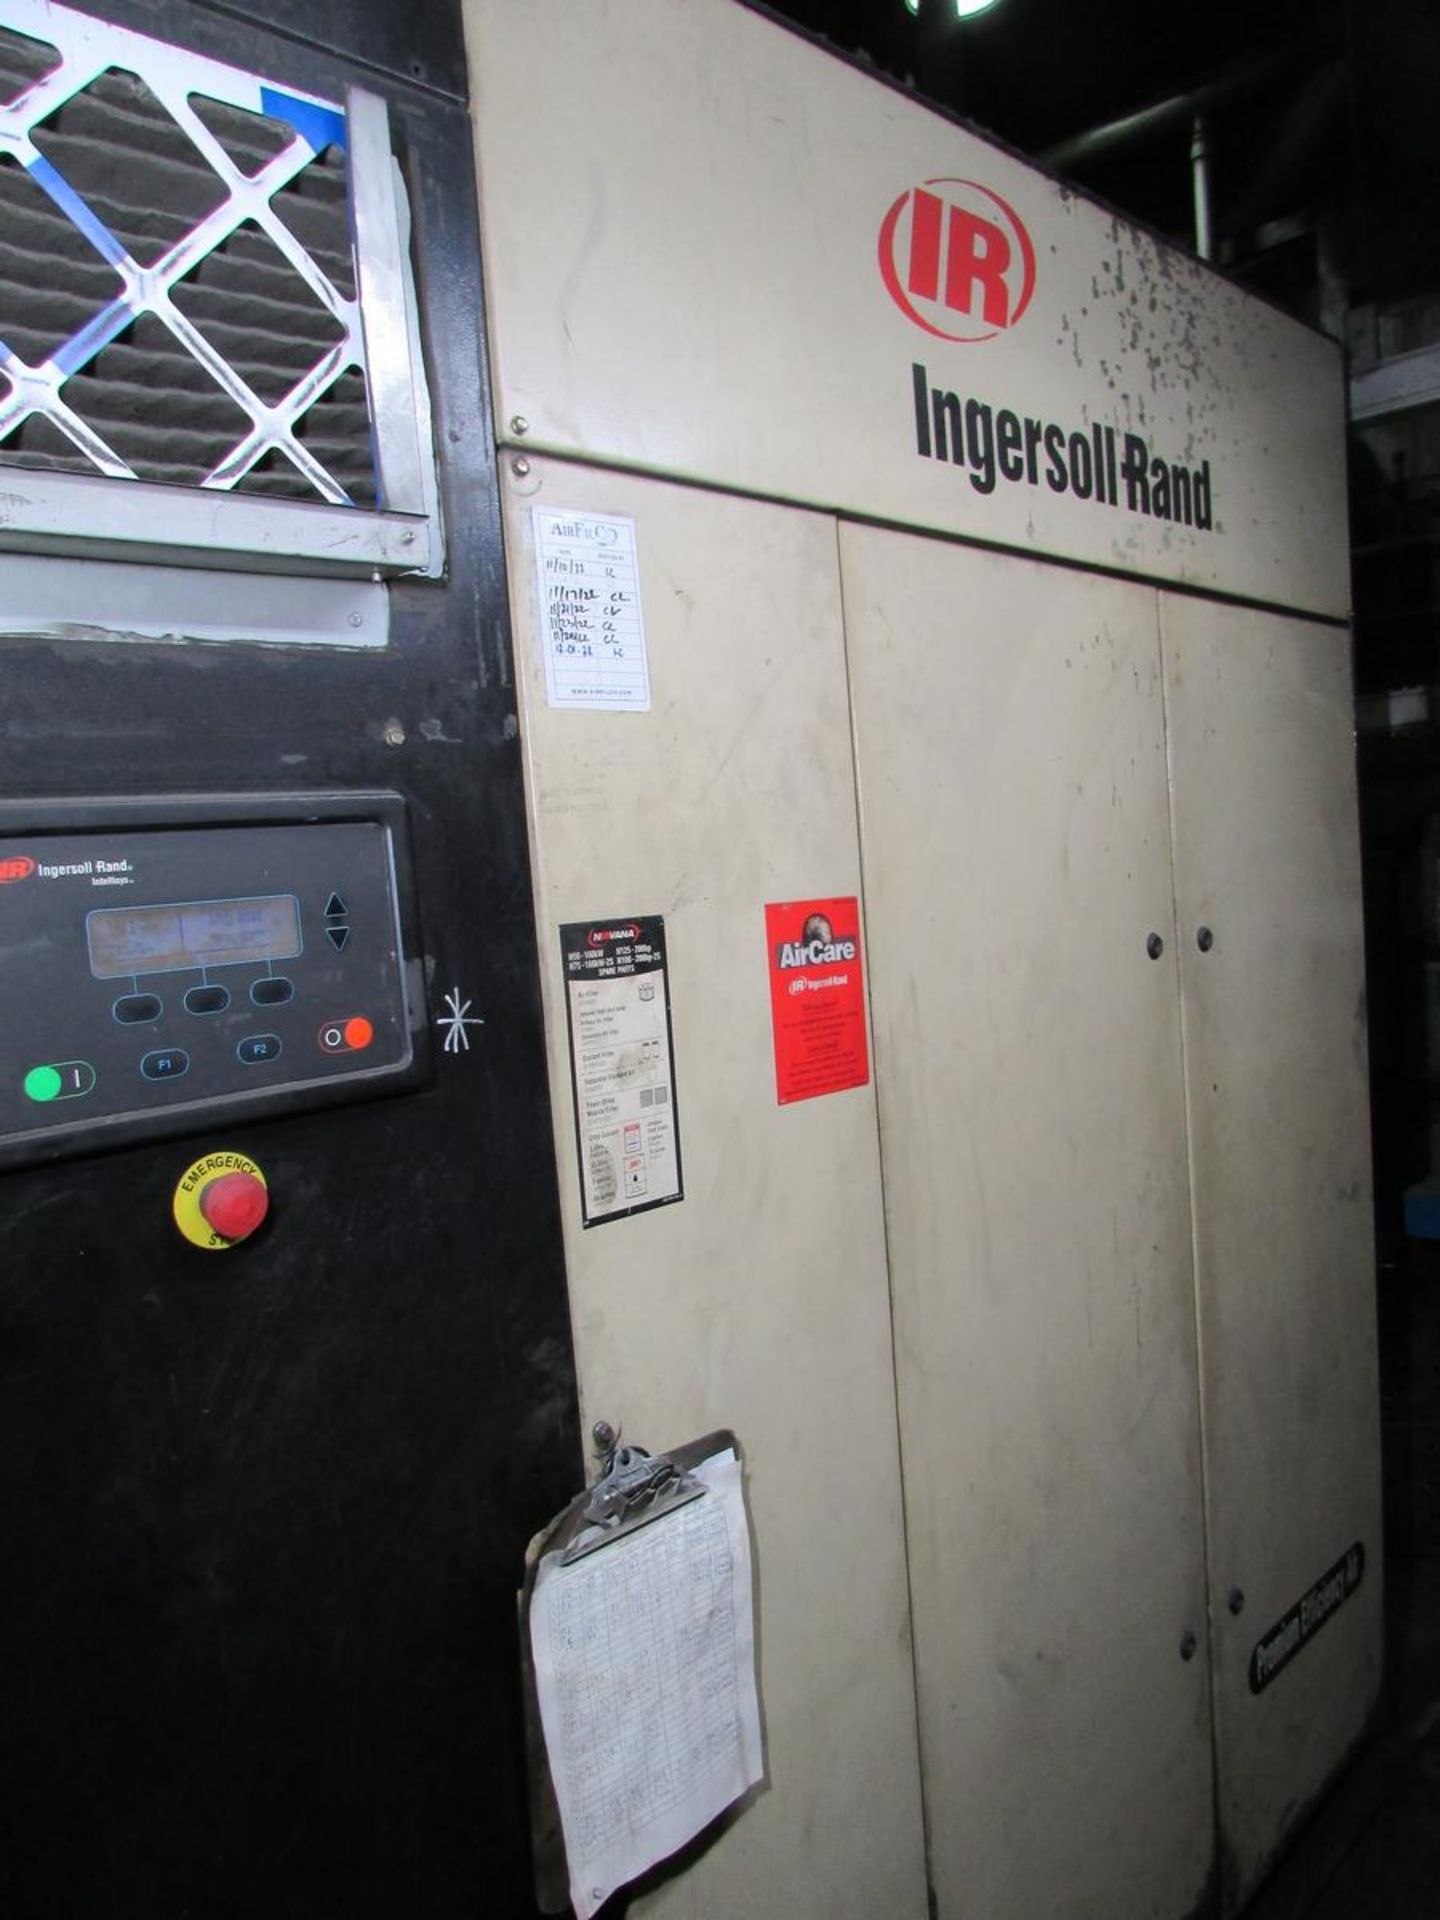 Ingersoll Rand 150 HP Rotary Screw Air Compressor - Image 6 of 11